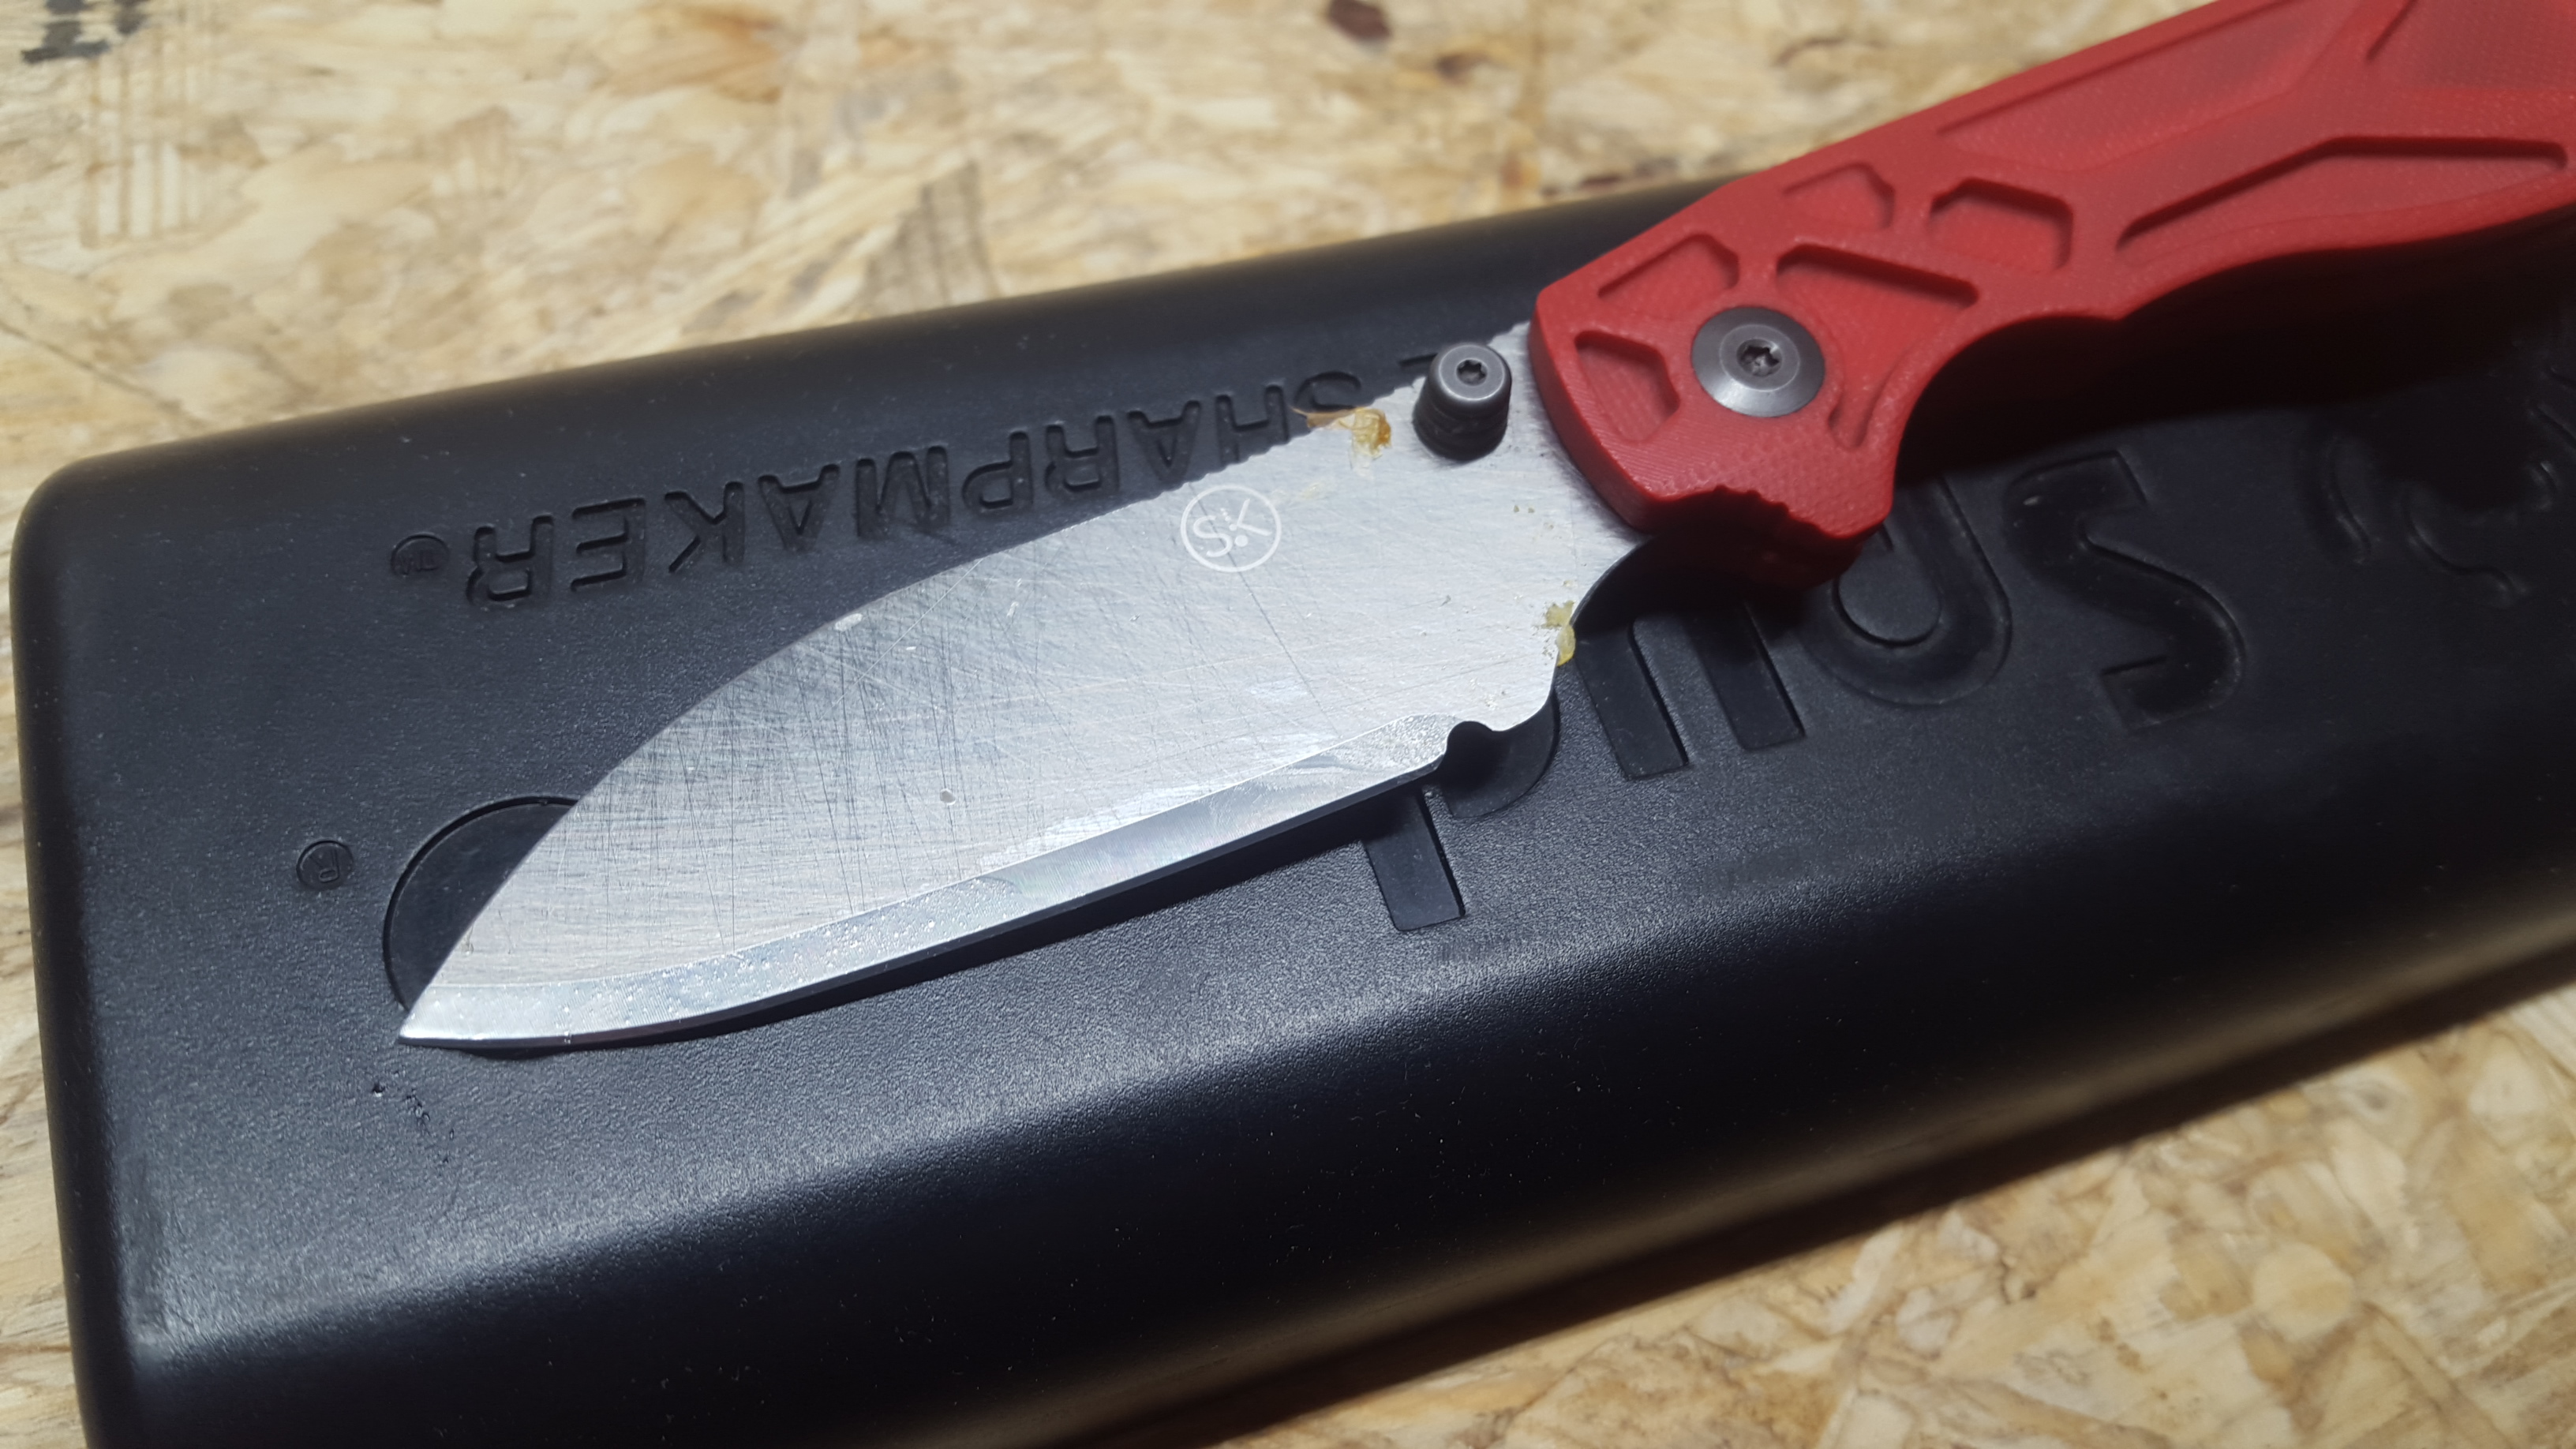 Sandrin Knives Torino Tungsten Carbide Folding Knife - Overview and Review  